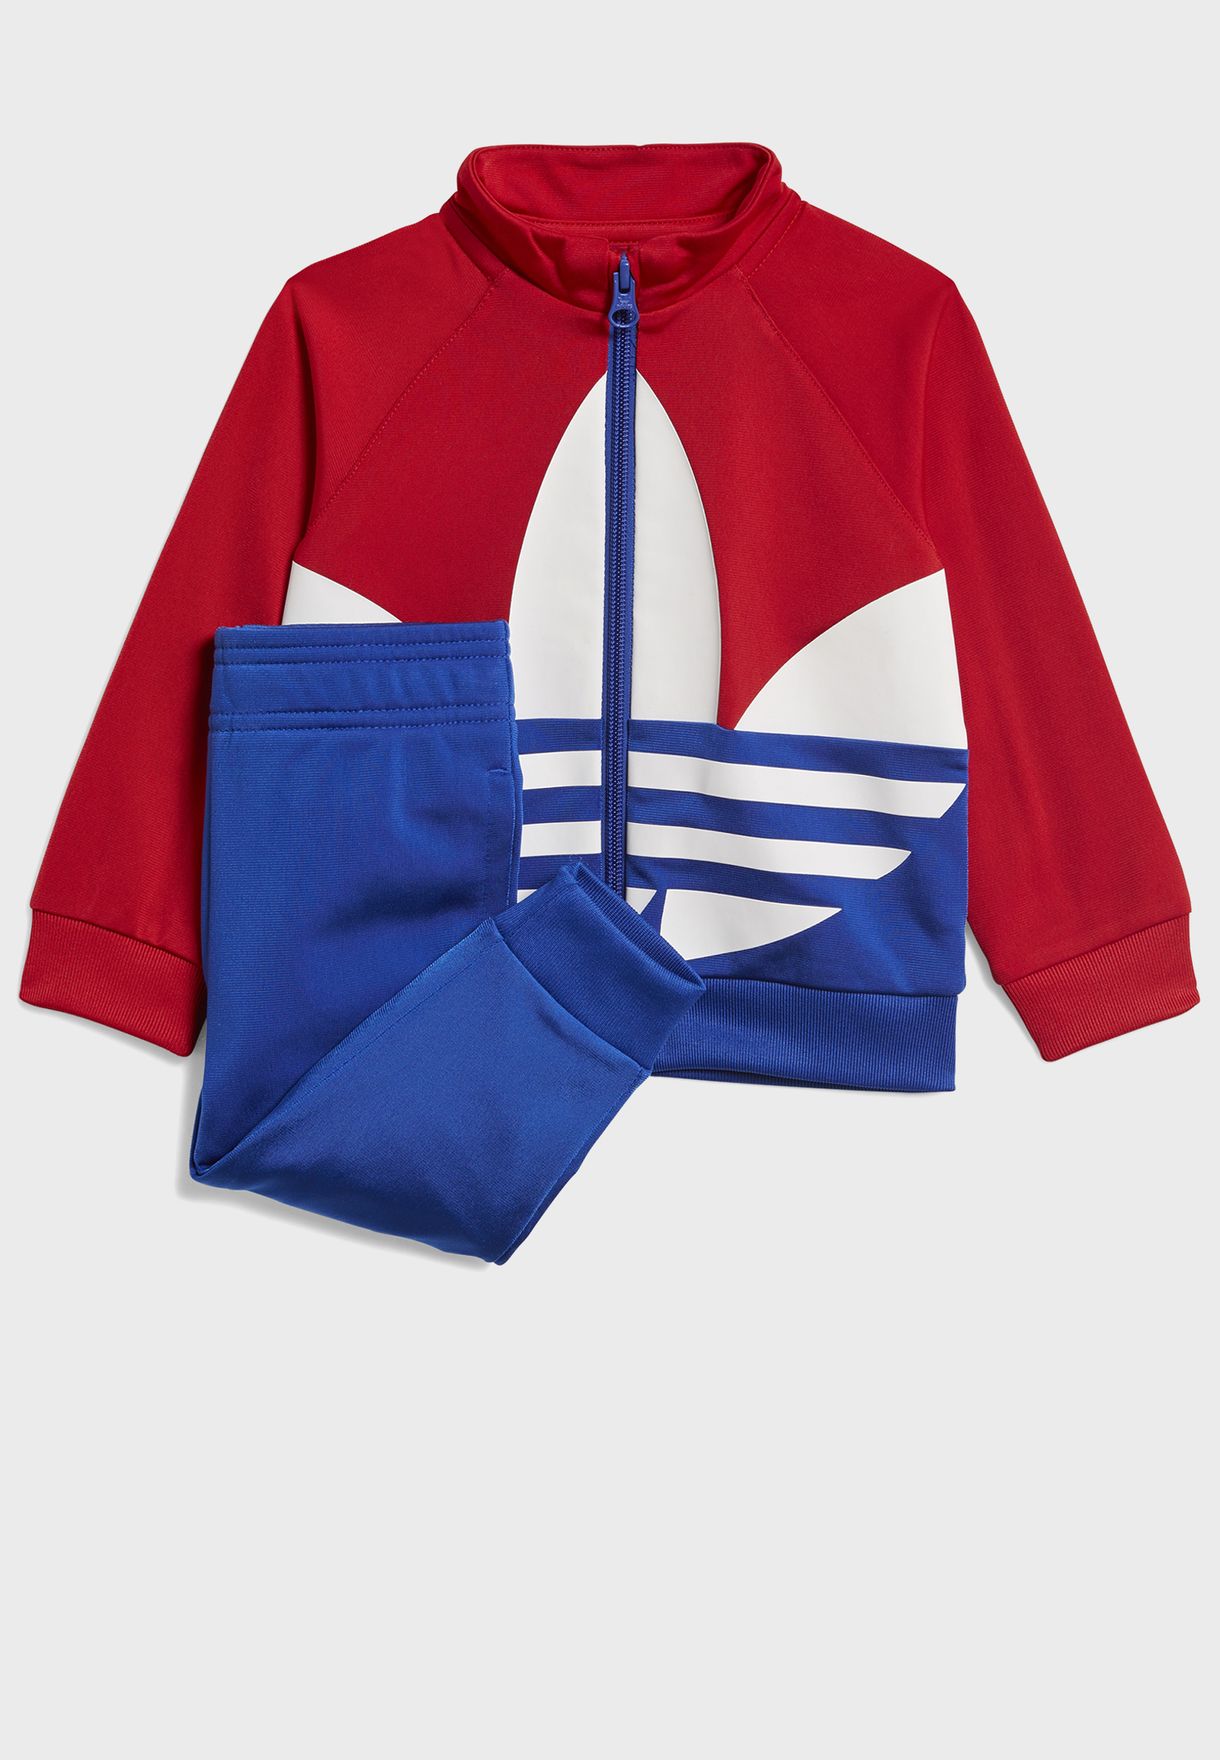 red adidas tracksuit infant